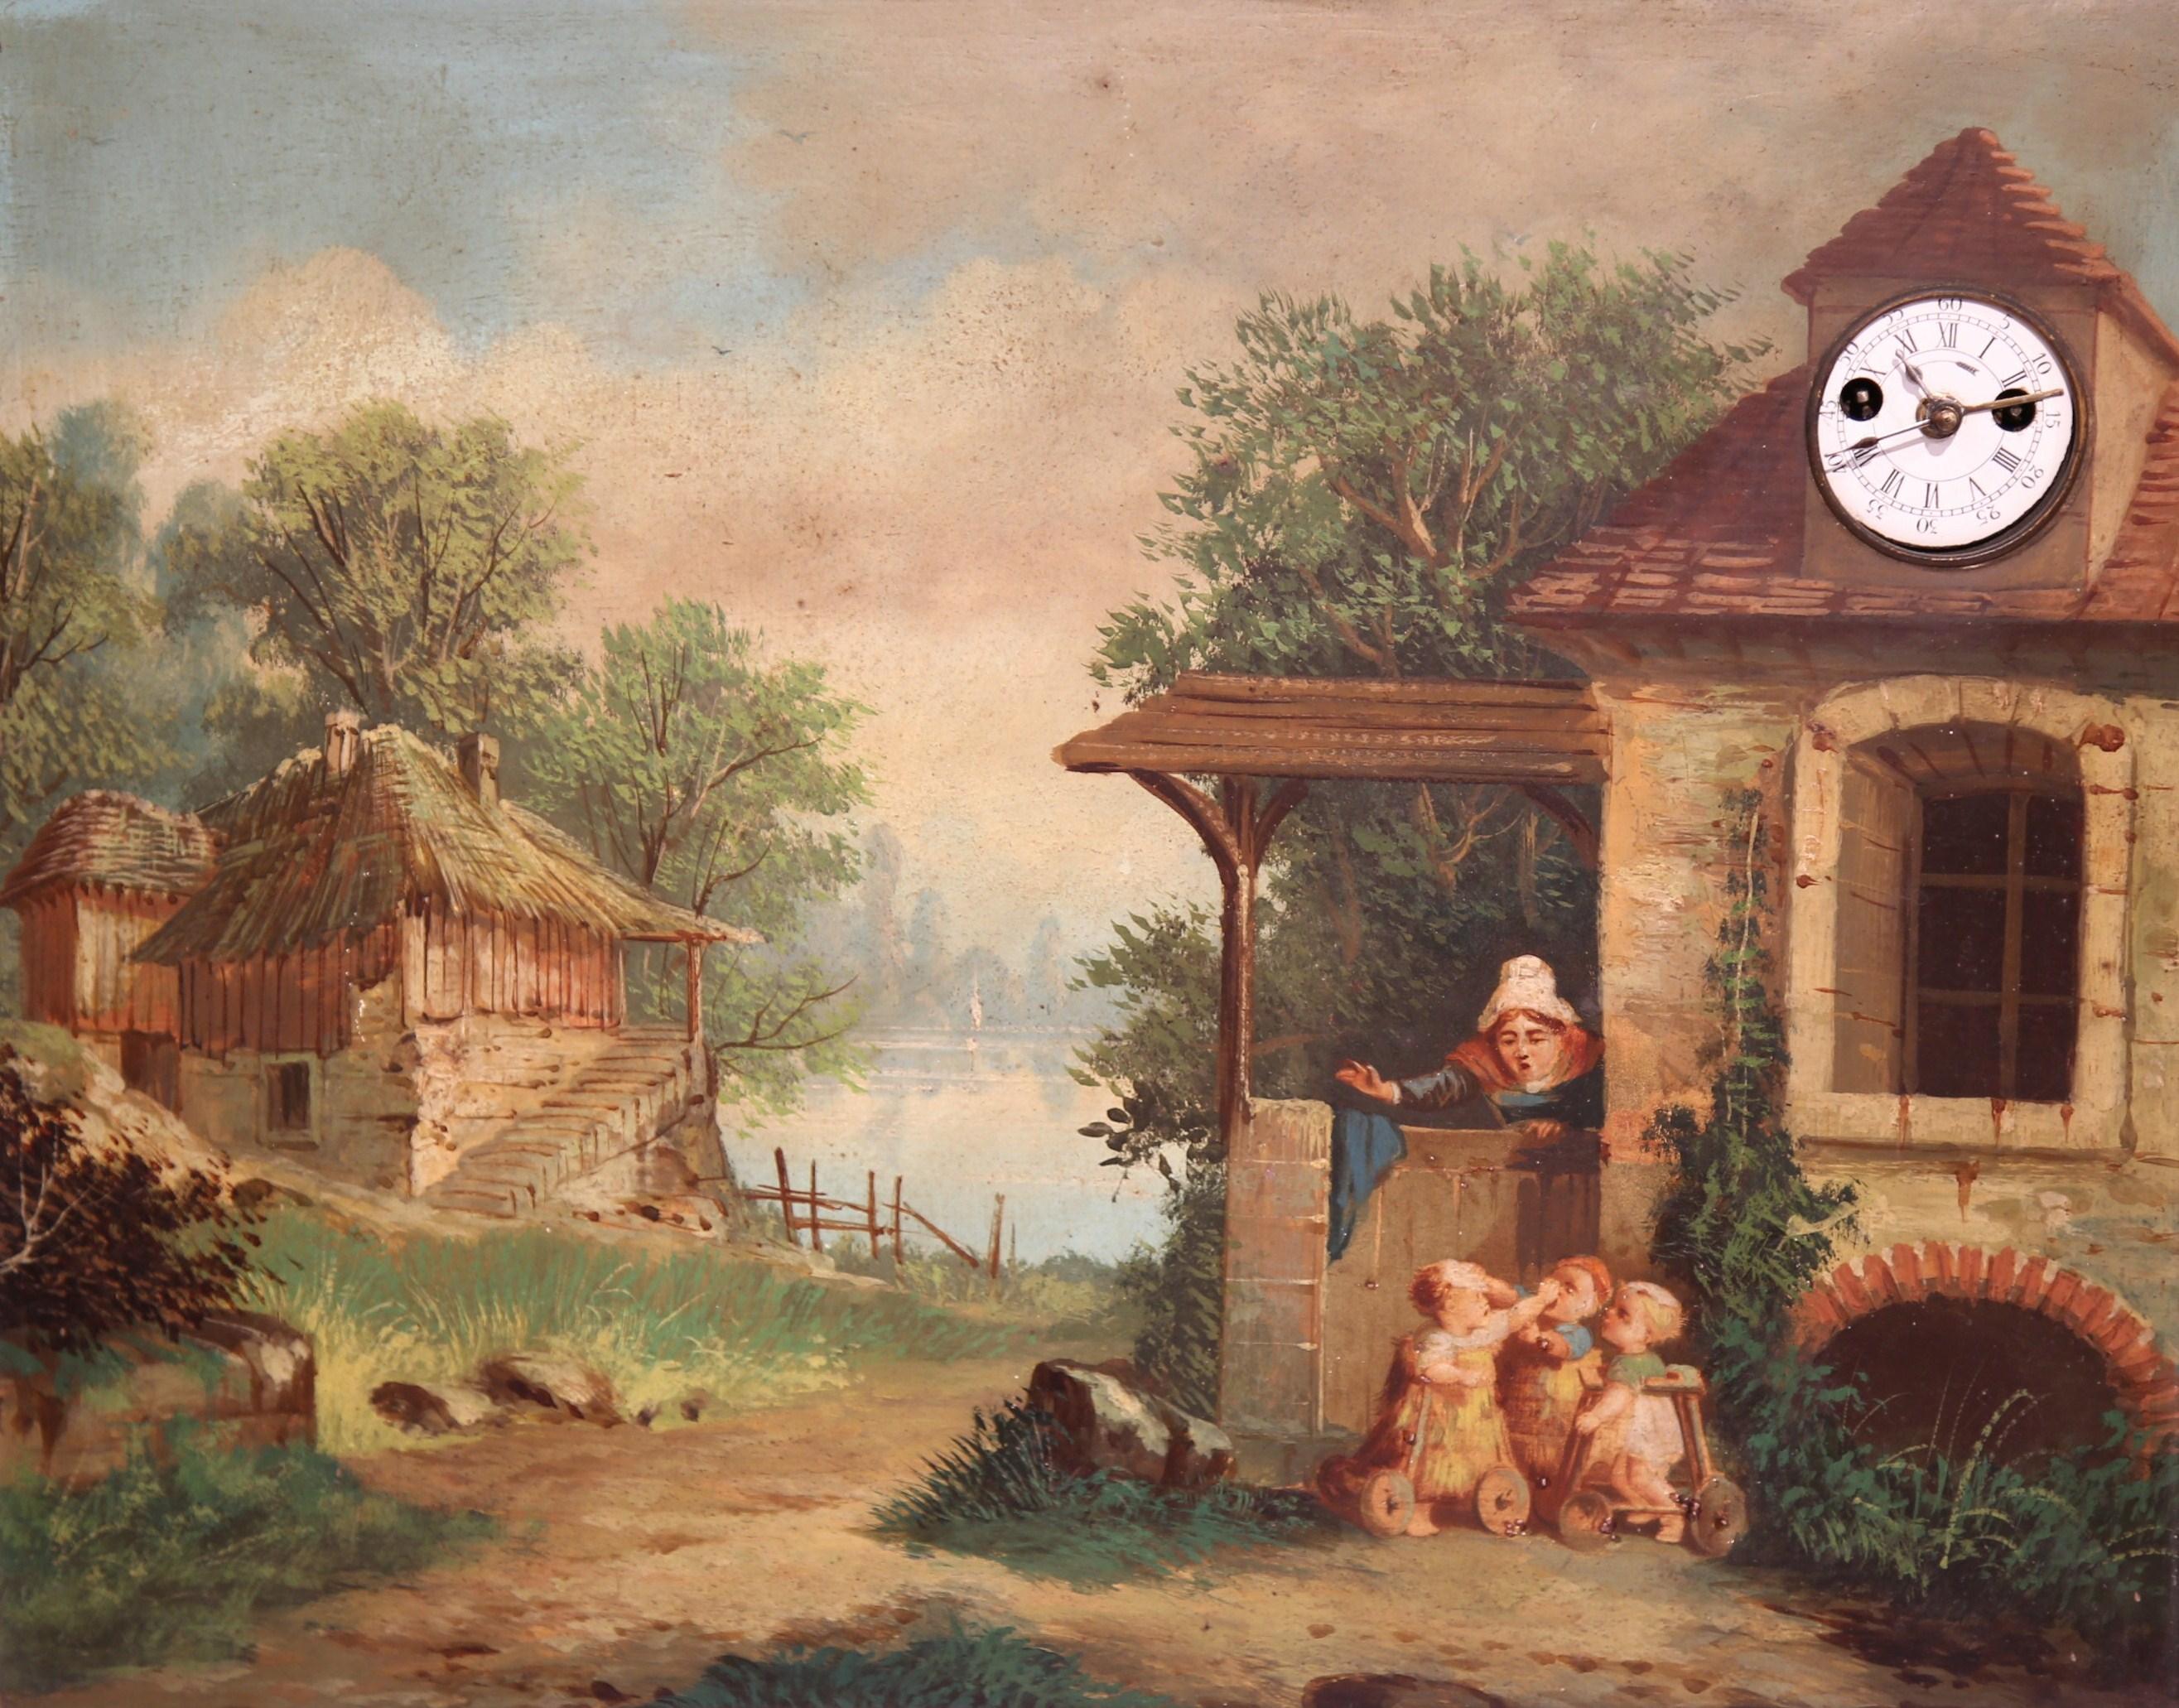 This unique, antique clock painting was painted on metal in France, circa 1860. Set in a carved gilt frame, the artwork depicts a village scene with three children playing and a mother looking over them. The original clock and the music box inside